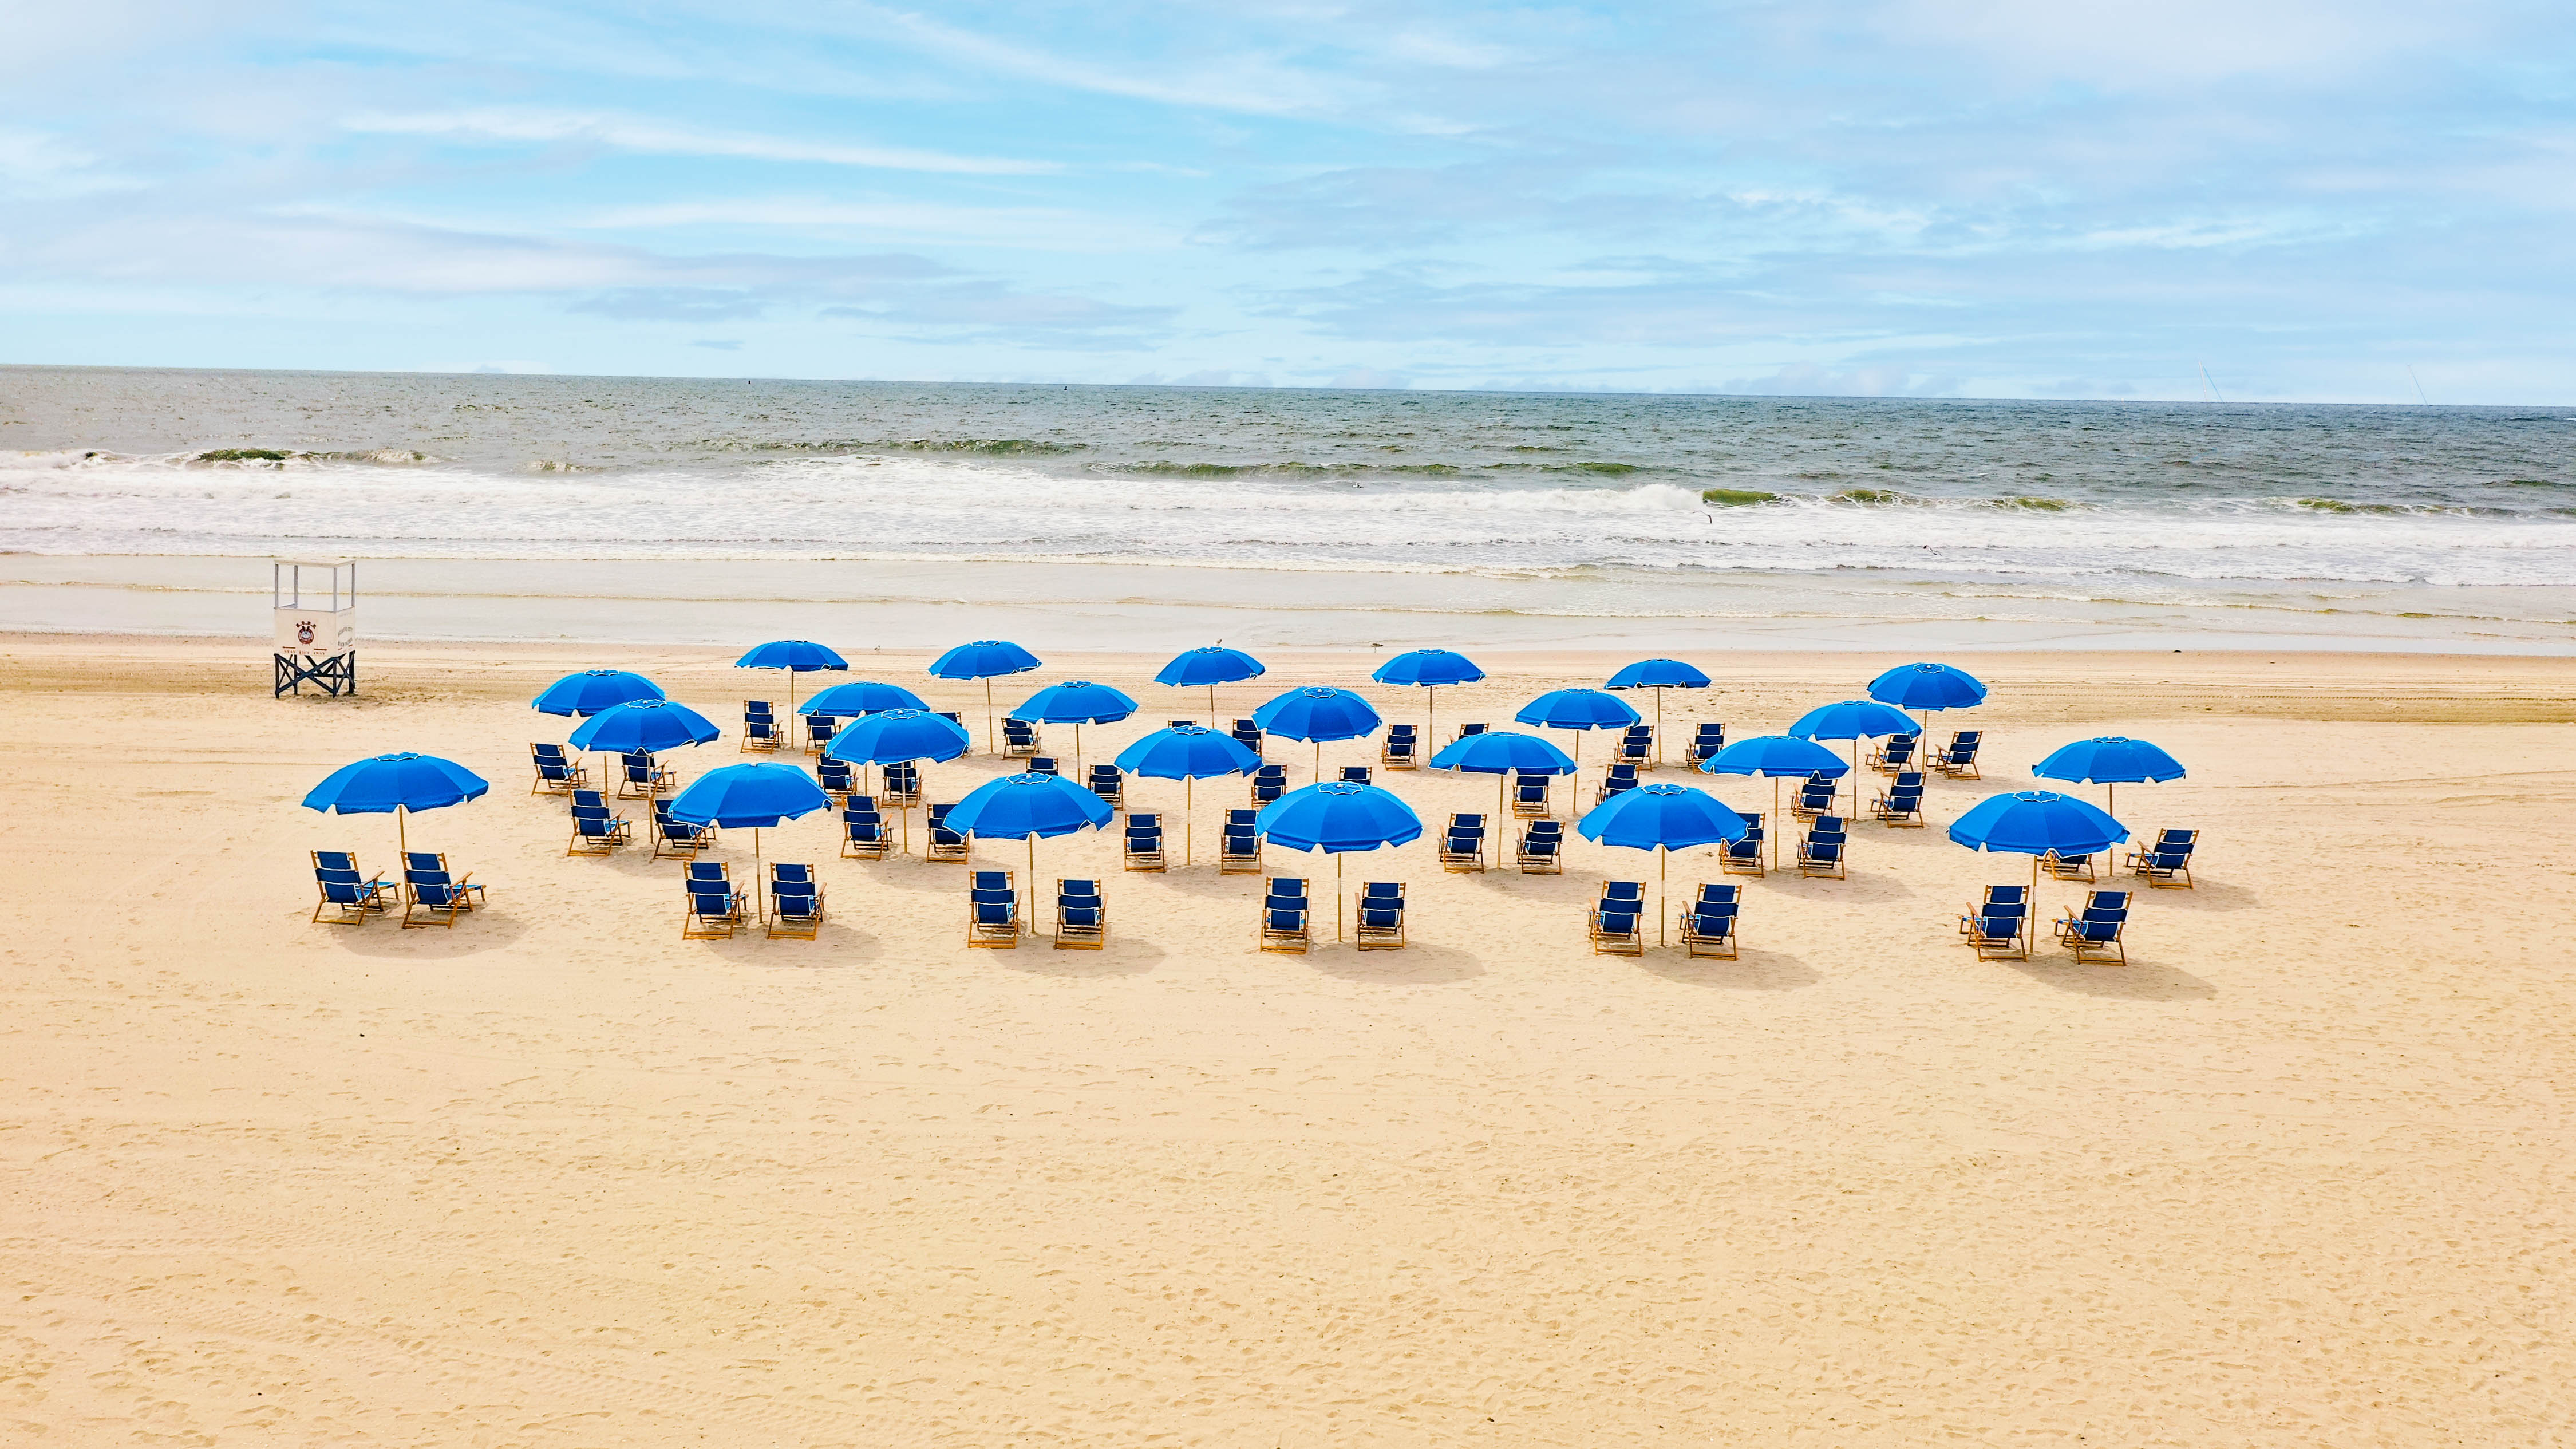 chairs lined up in the sand on the beach